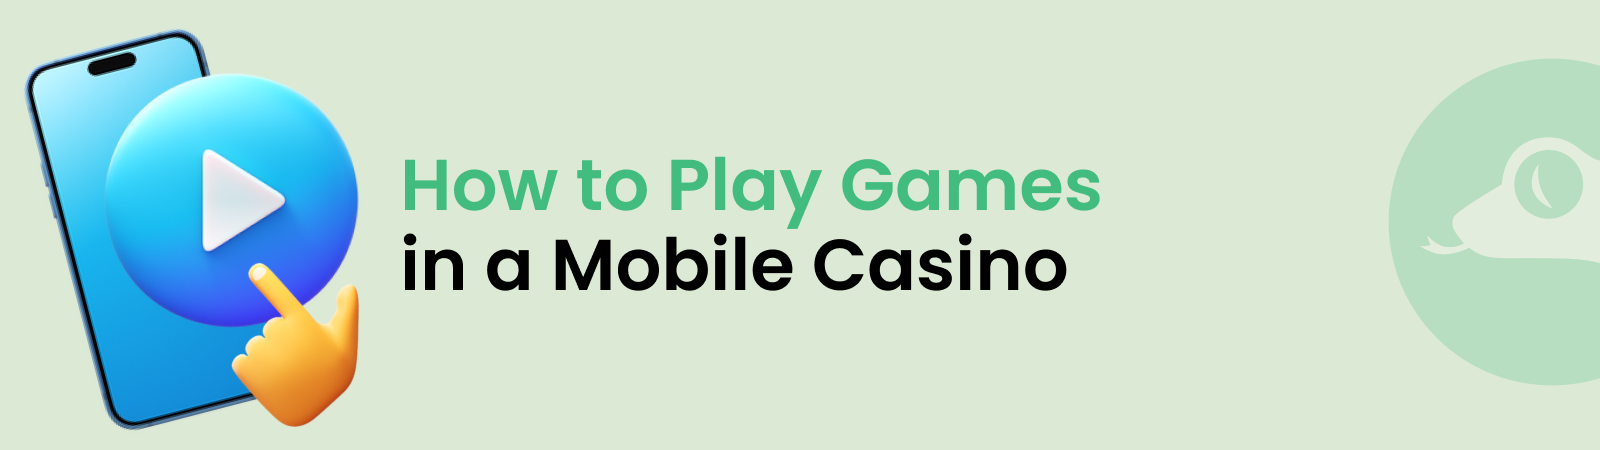 play games in a mobile casino